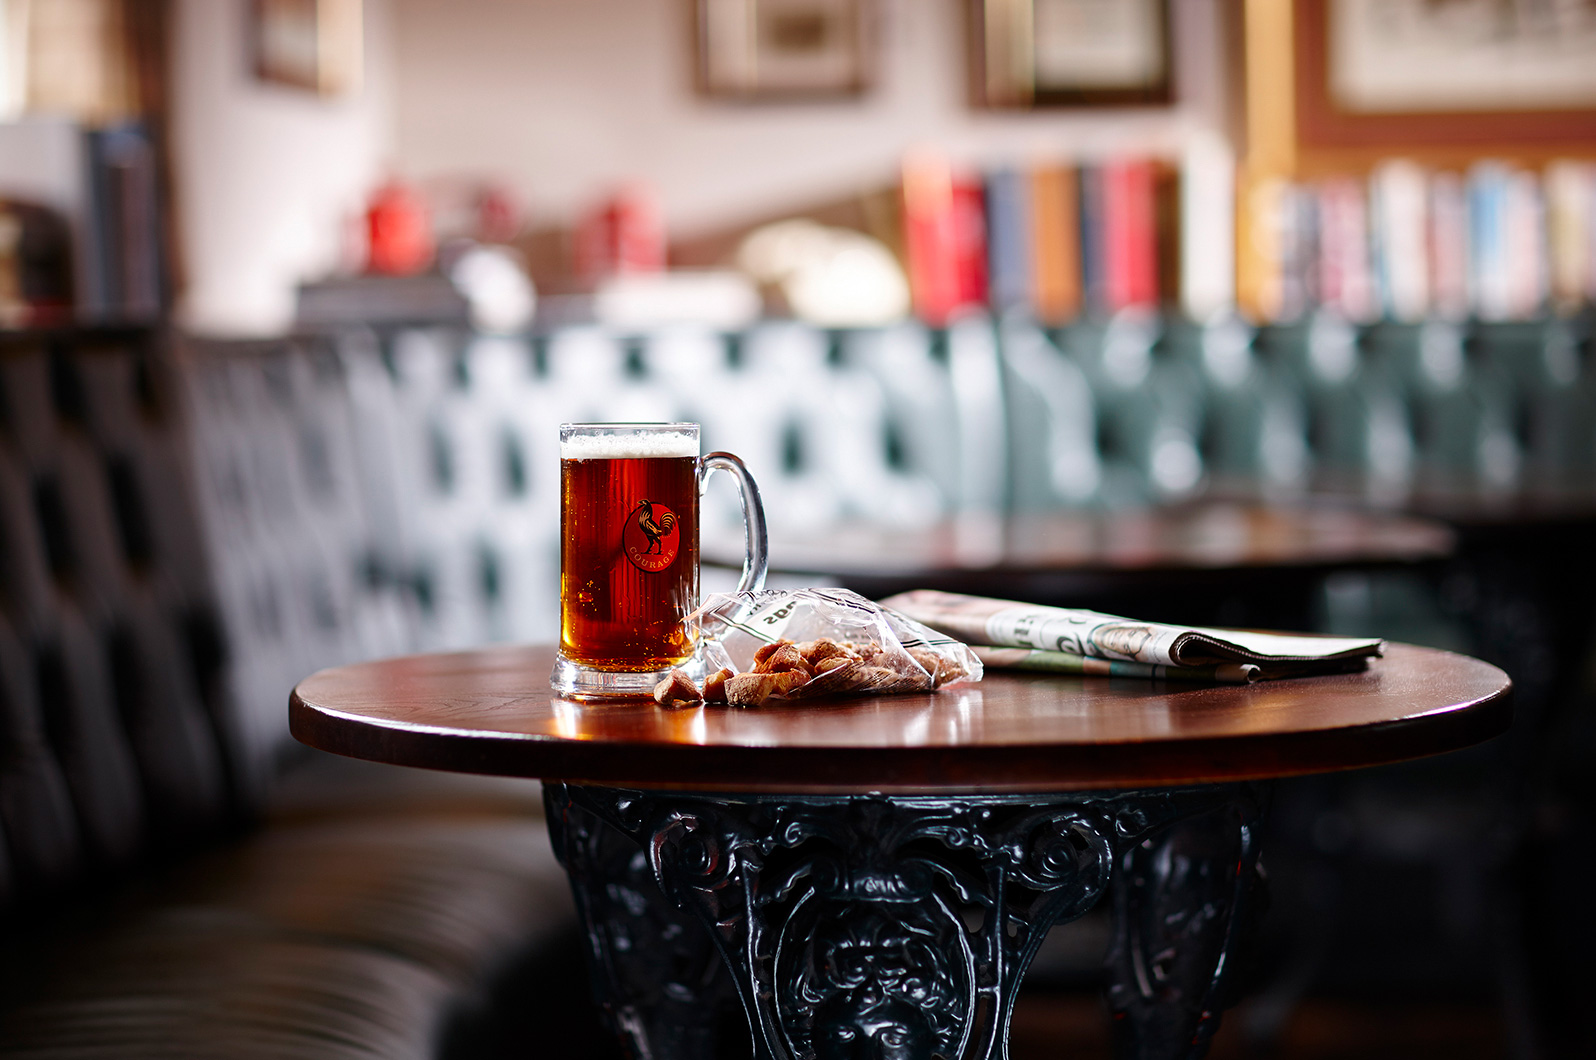 Image shot on location in one of Buccaneer’s pubs. Lighting used to add atmosphere.